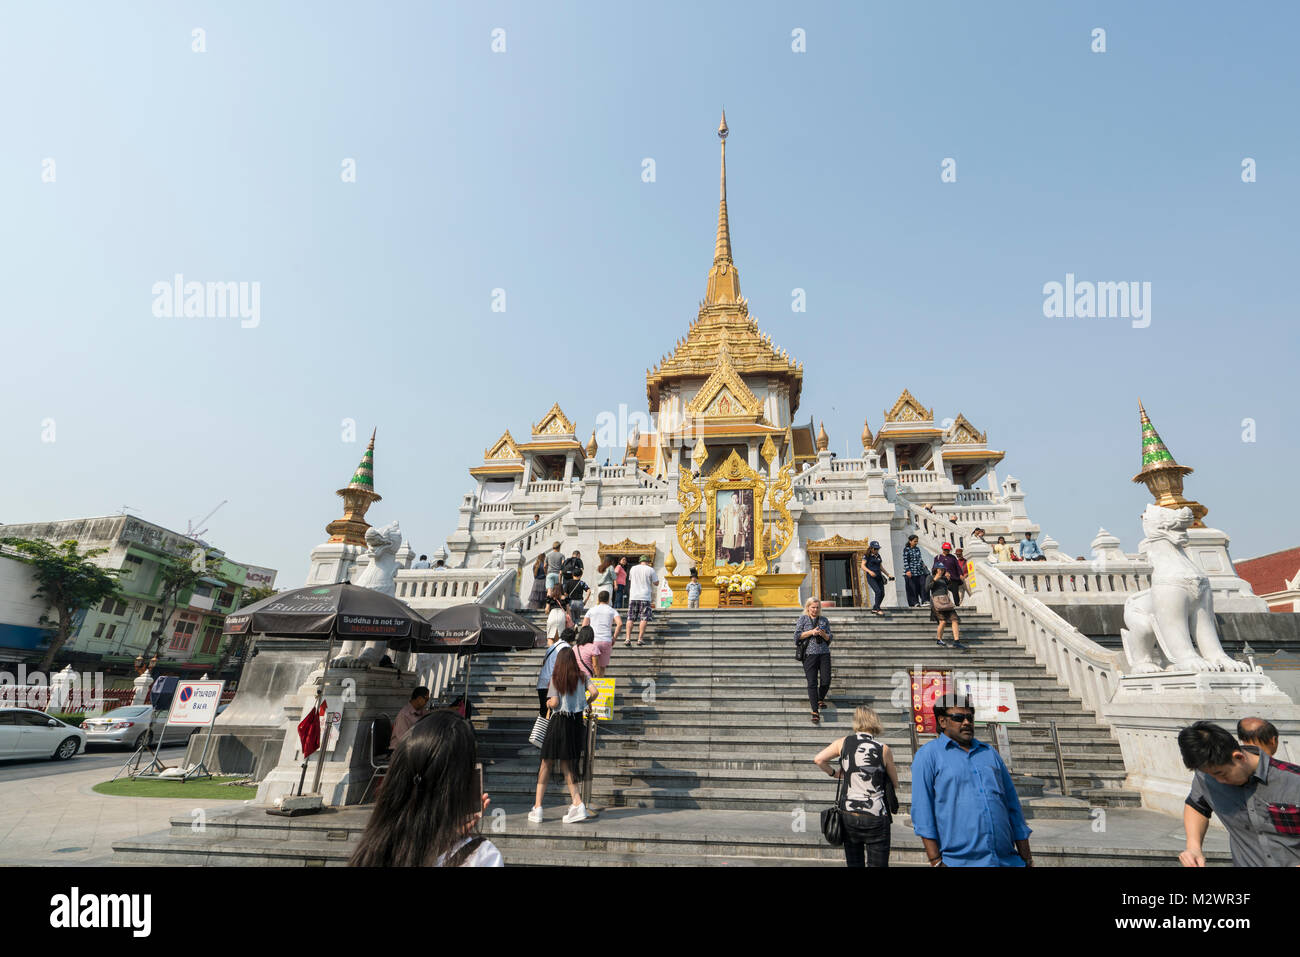 The external view of Wat Traimit temple in Bangkok, Thailand Stock Photo